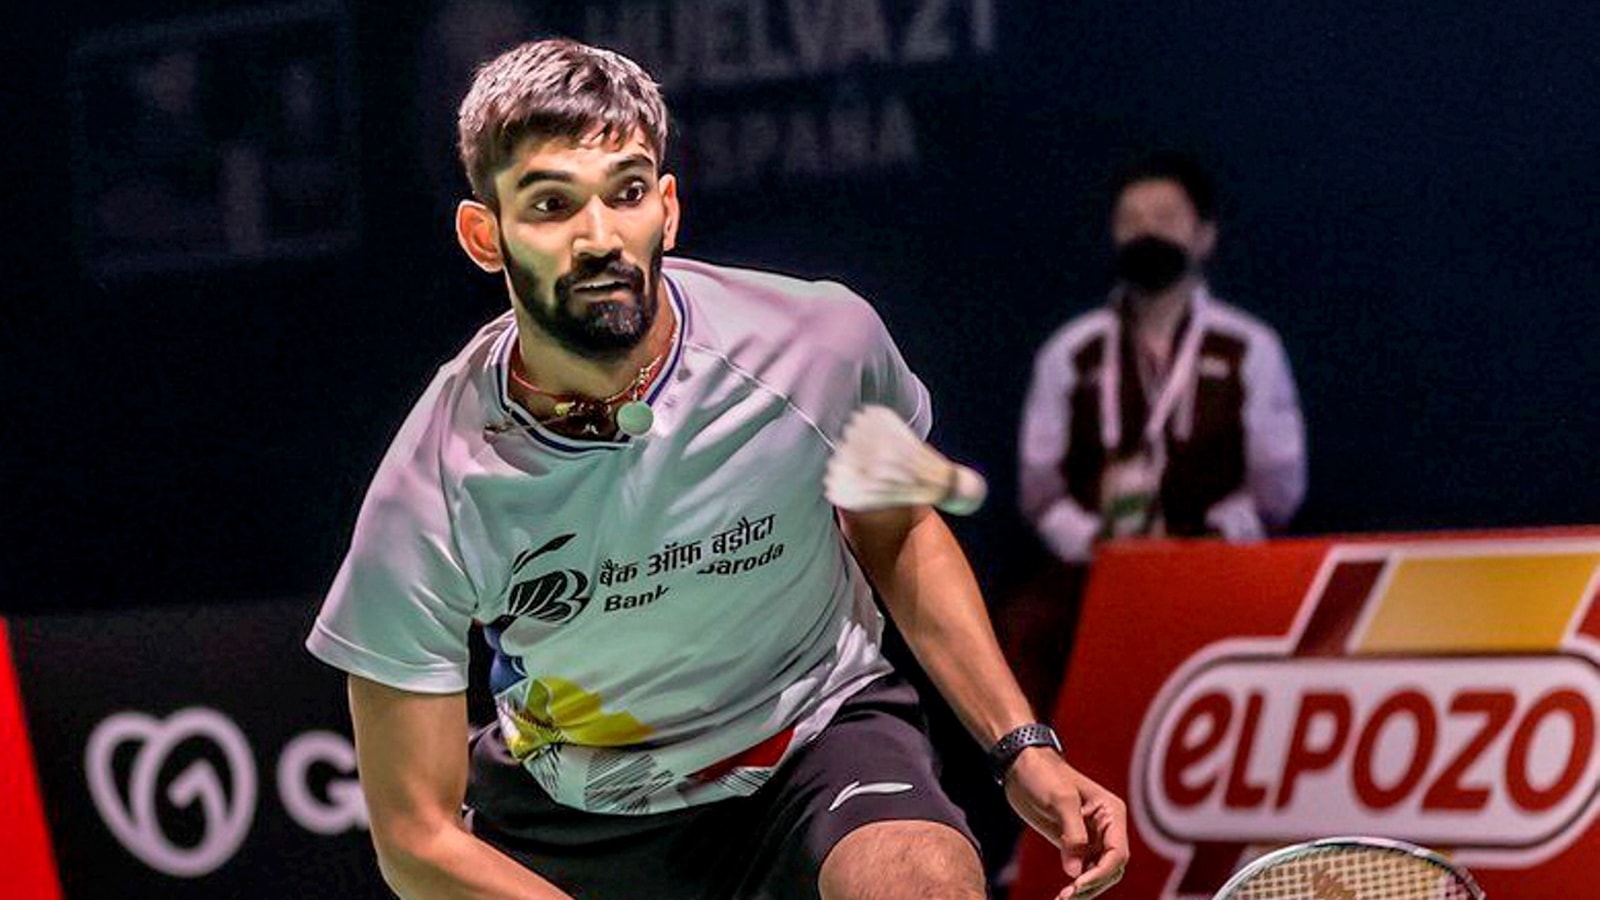 BWF World Championships 2021 Kidambi Srikanth becomes first Indian male shuttler to claim silver